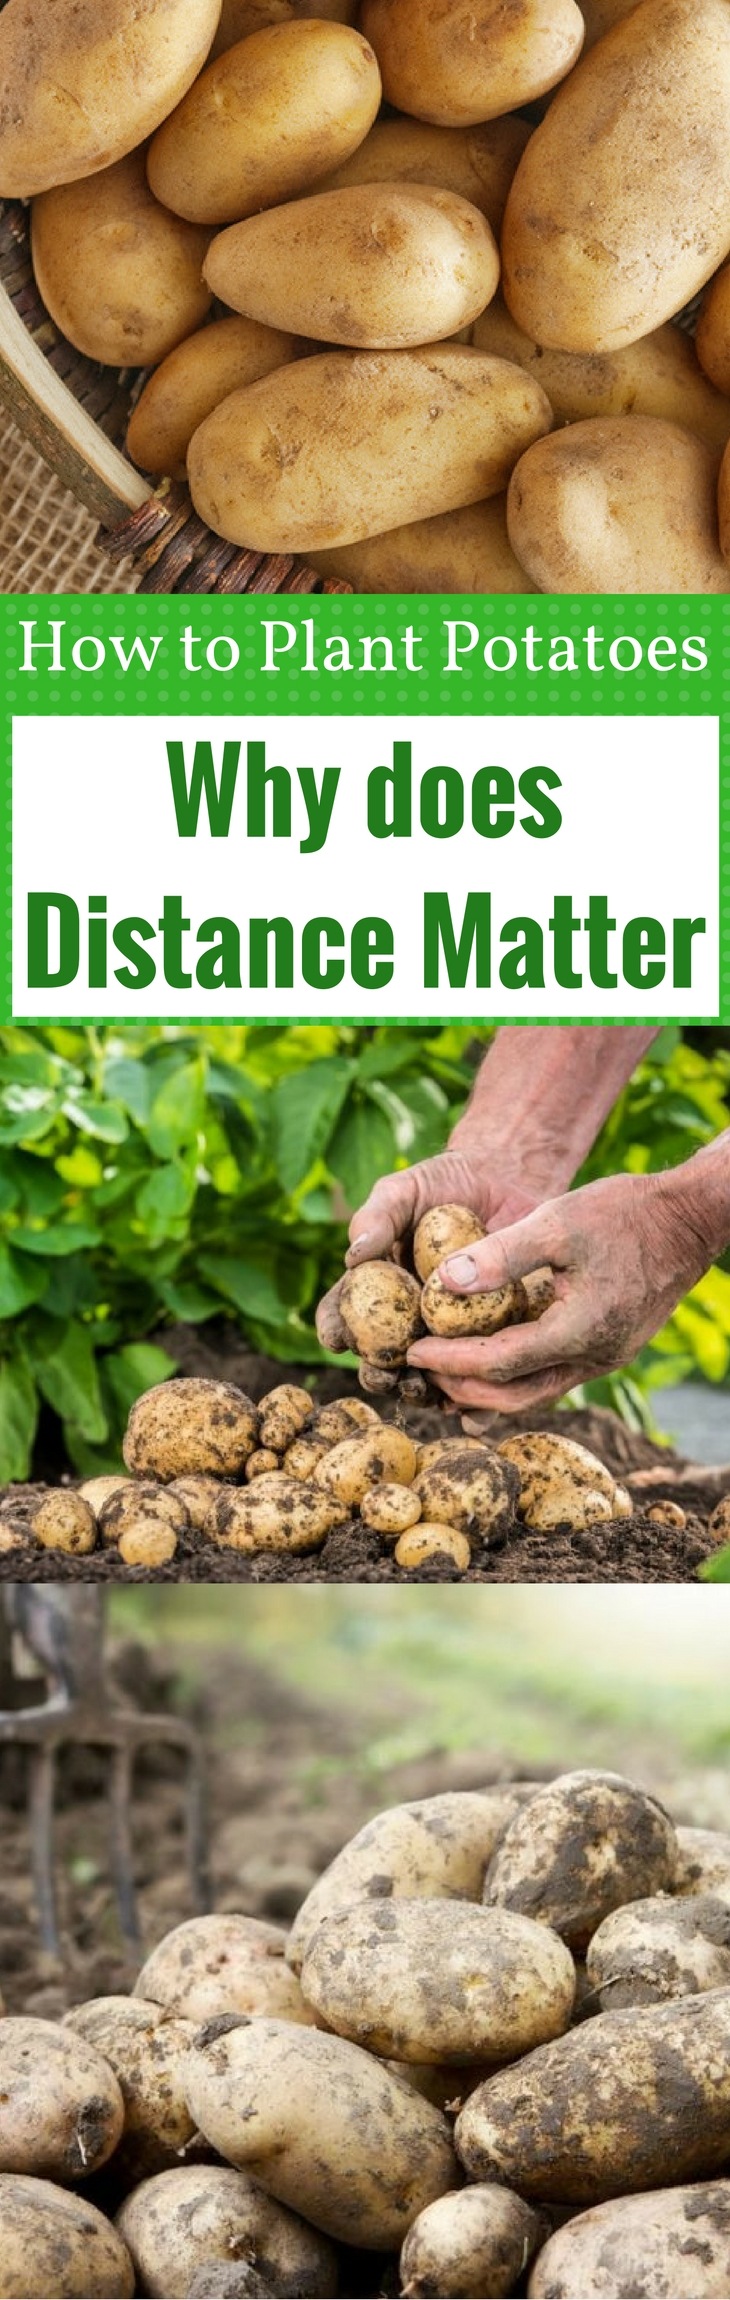 How to Plant Potatoes - Why does Distance Matter